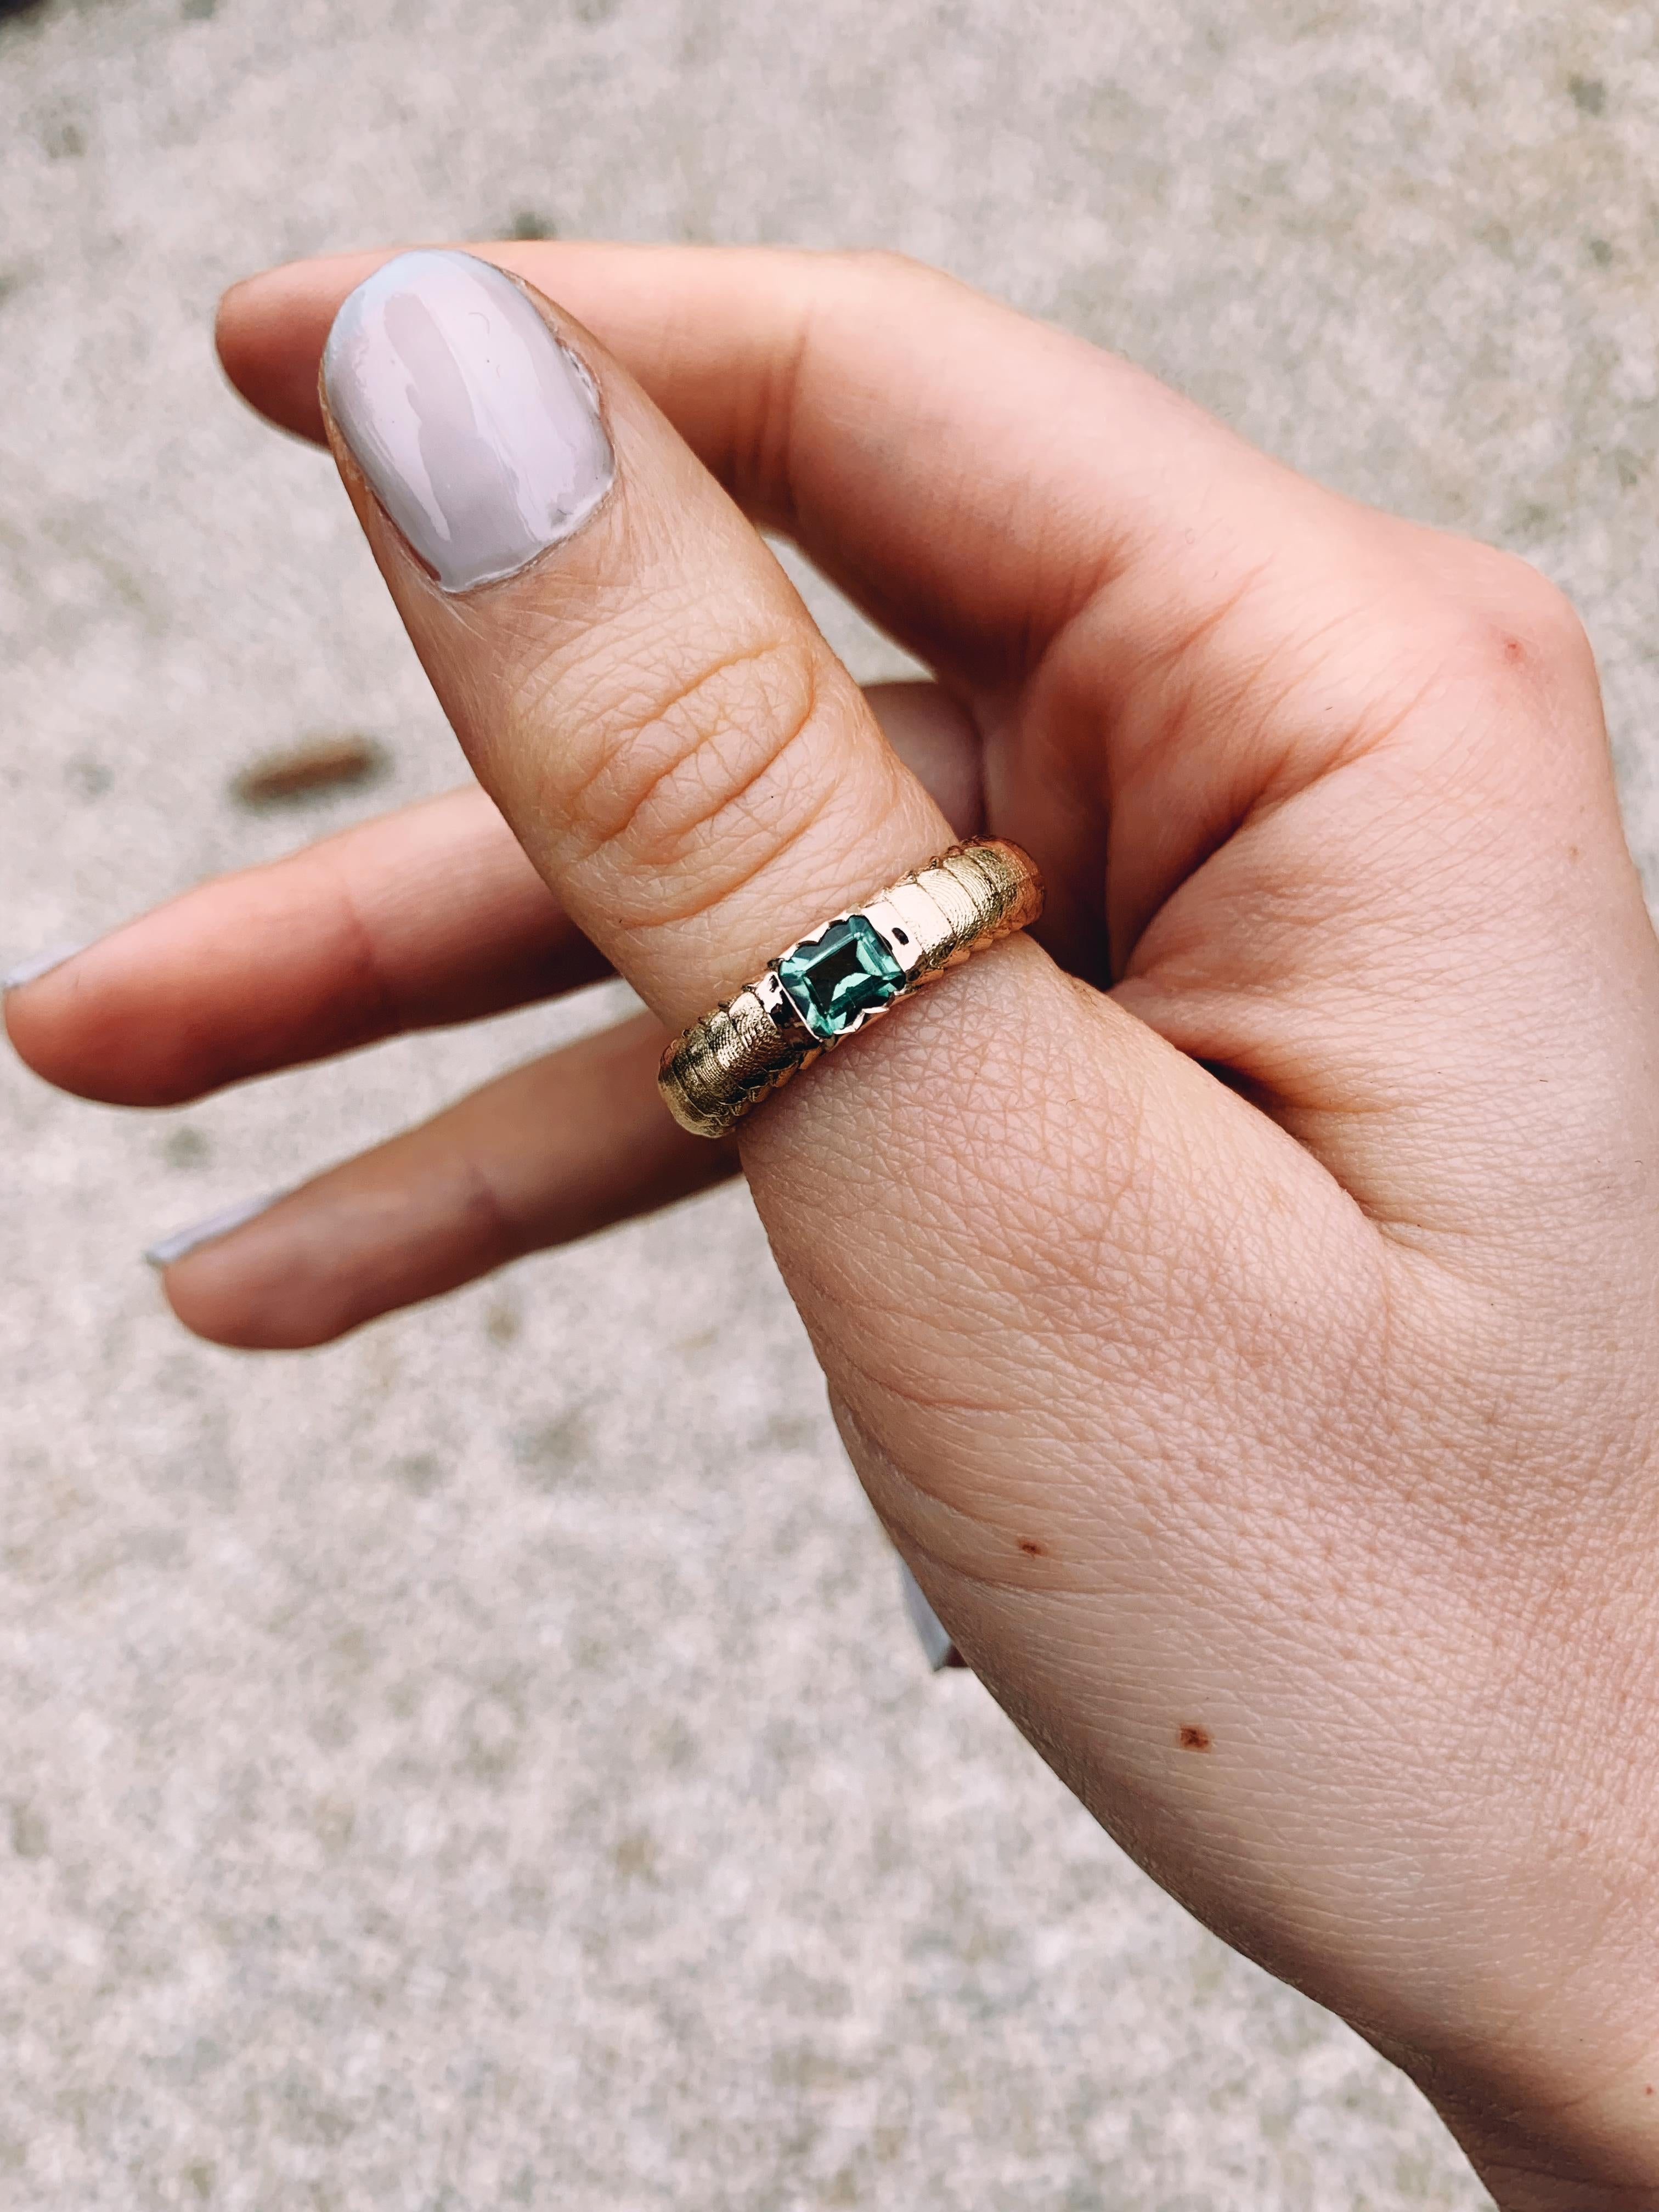 Dragons have always been associated with strength and loyalty, so this ring is meant to inspire you and give you confidence.

Made of 18ct recycled gold with ethically mined zircon from Madagascar.

This item is one-of-a-kind.